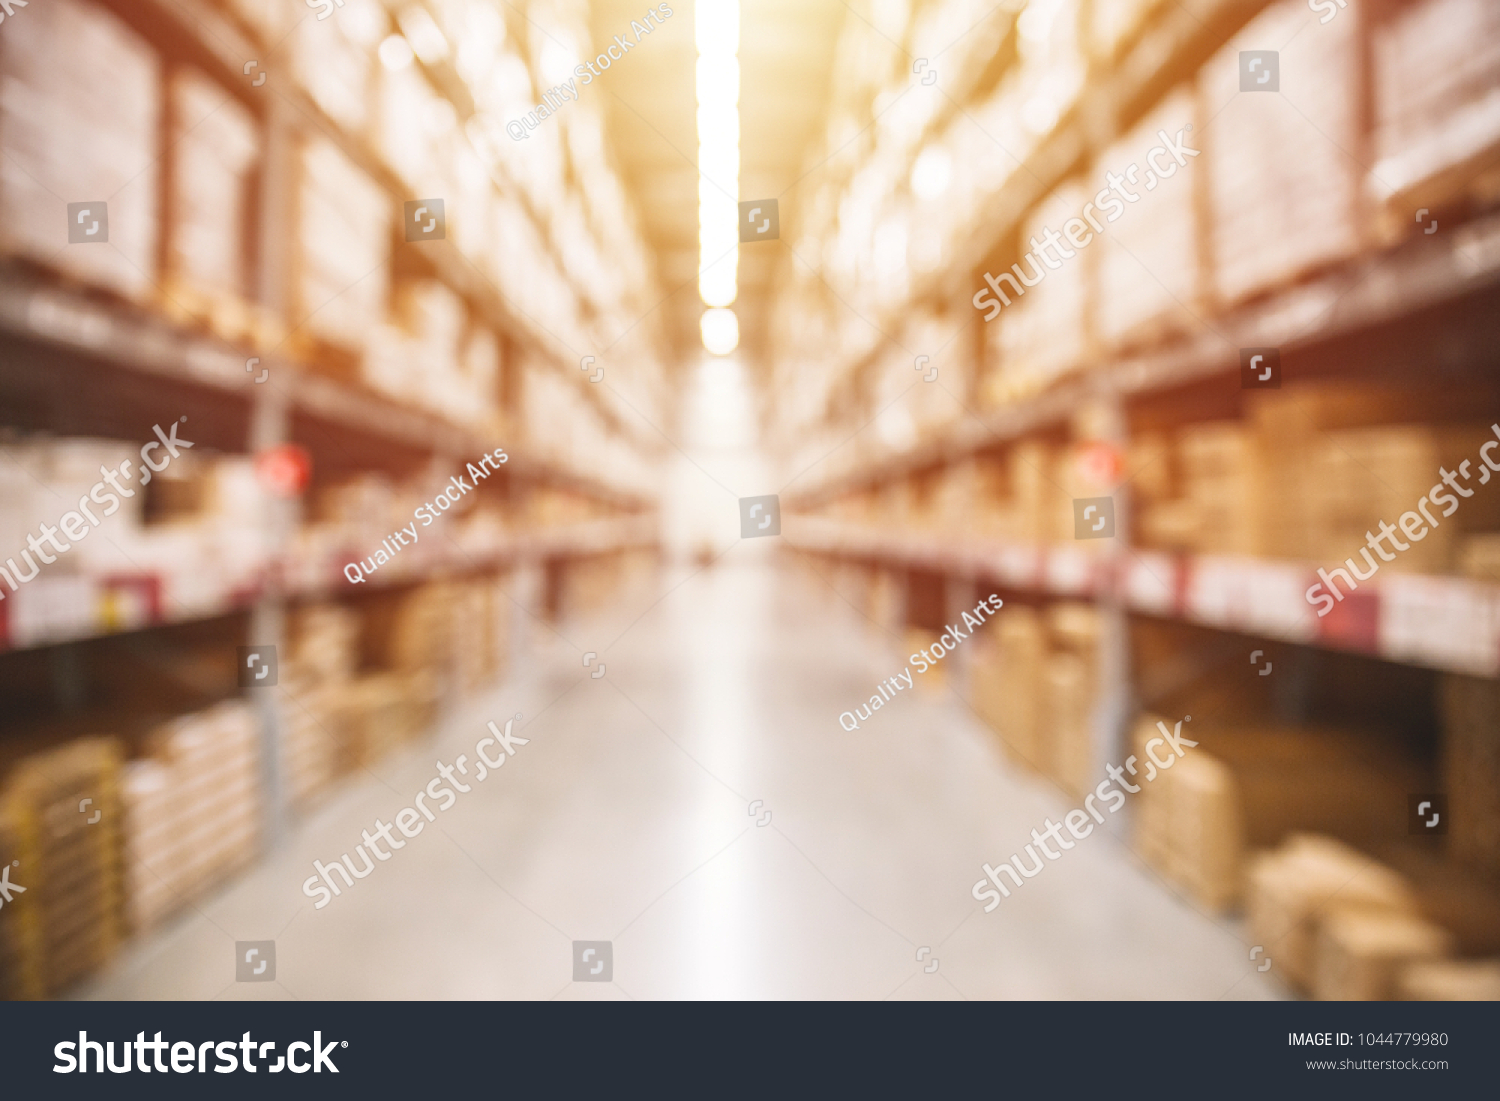 Blur Warehouse inventory product stock for logistic background #1044779980